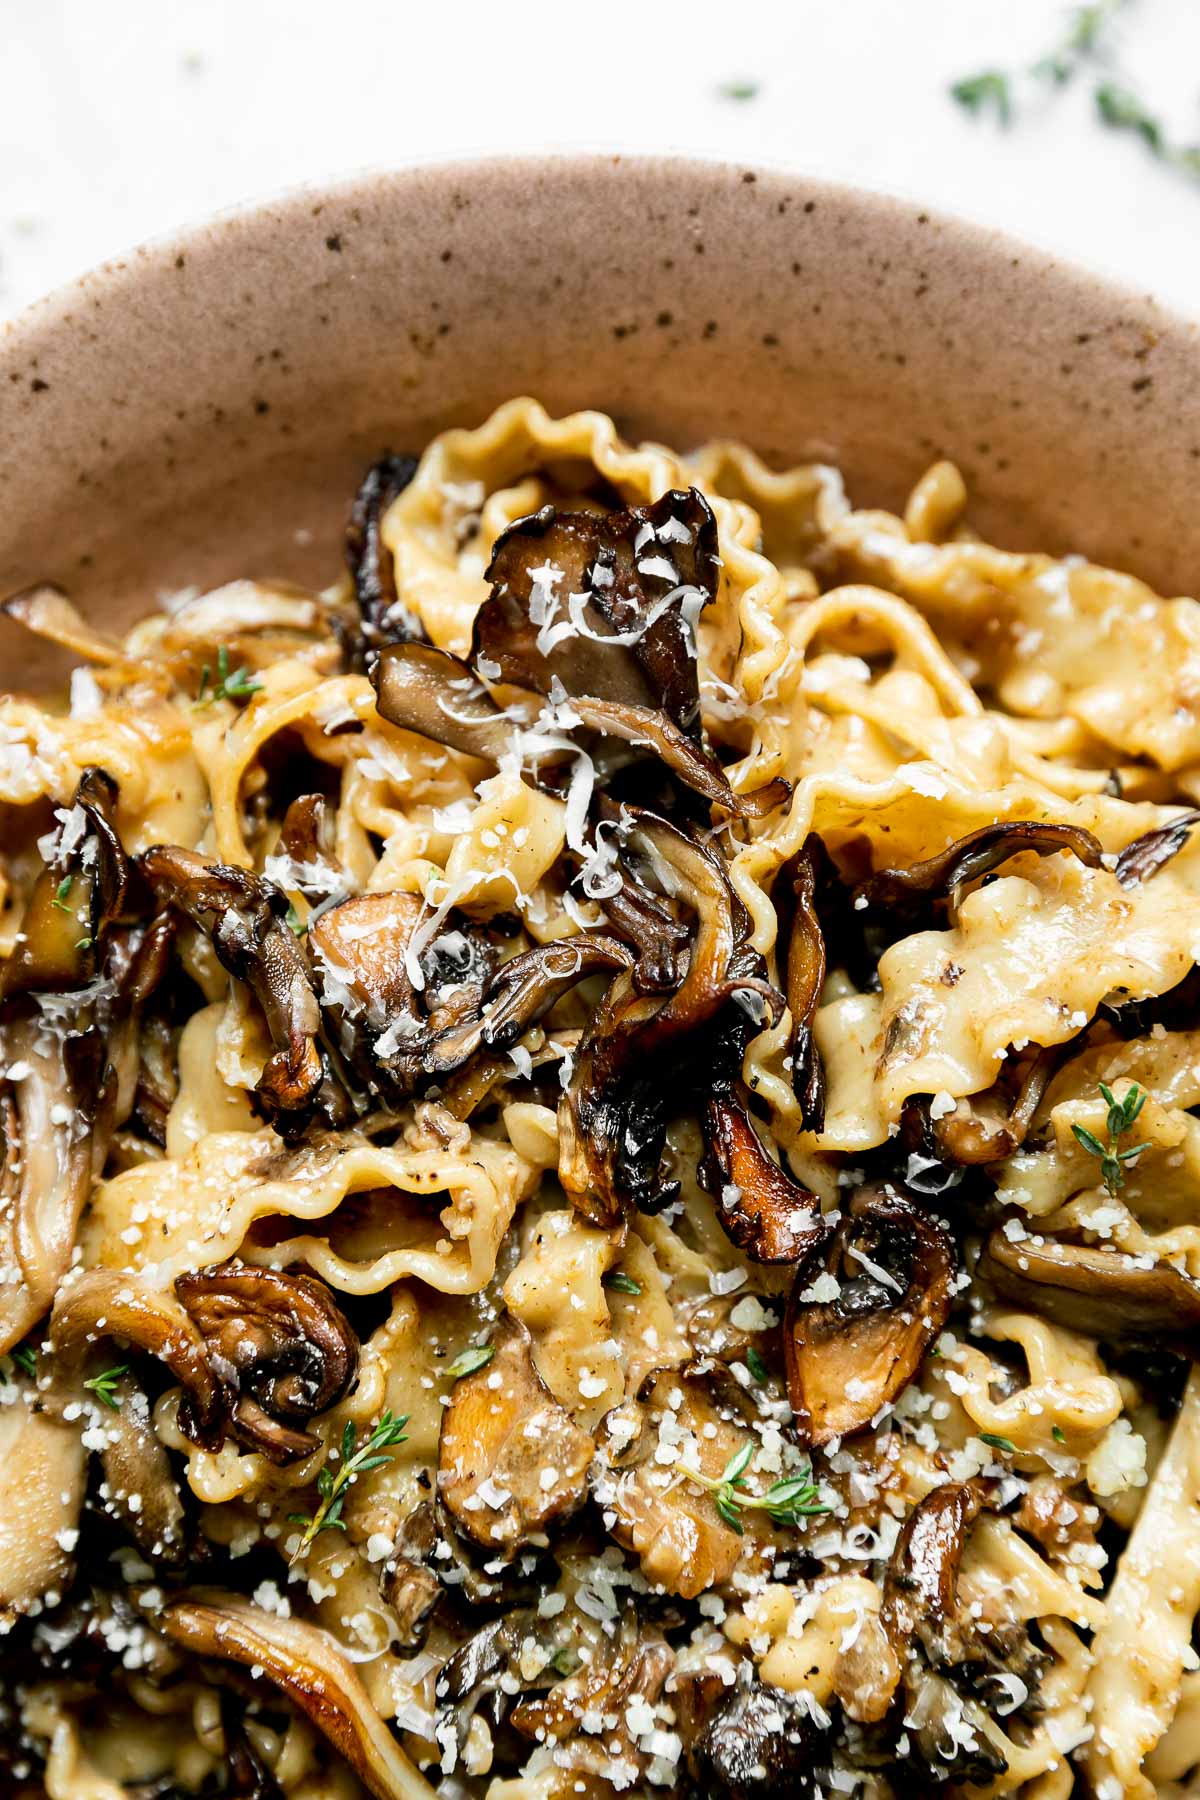 A serving of wild mushroom ragu pasta fills a brown speckled ceramic bowl. The pasta has been garnished with freshly grated parmesan and herbs. The bowl sits atop a creamy white textured surface with a few loose sprigs of fresh herbs sprinkled alongside.